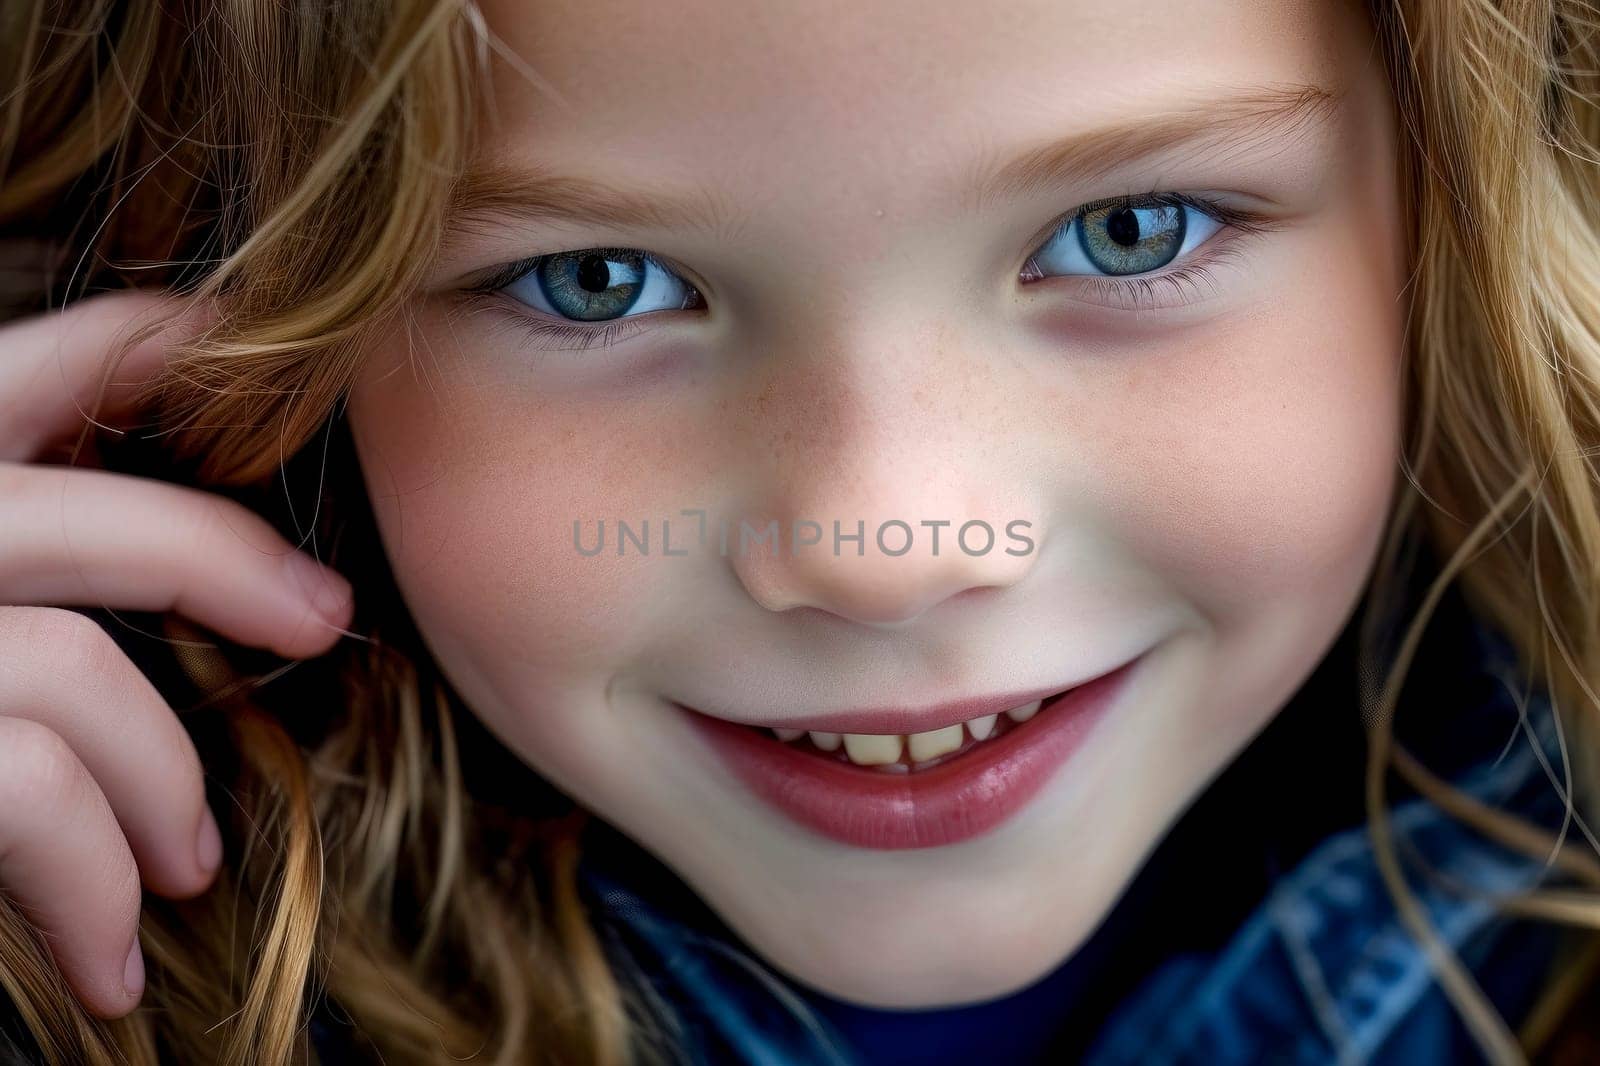 A captivating close-up photo capturing the radiant smile of a young girl.